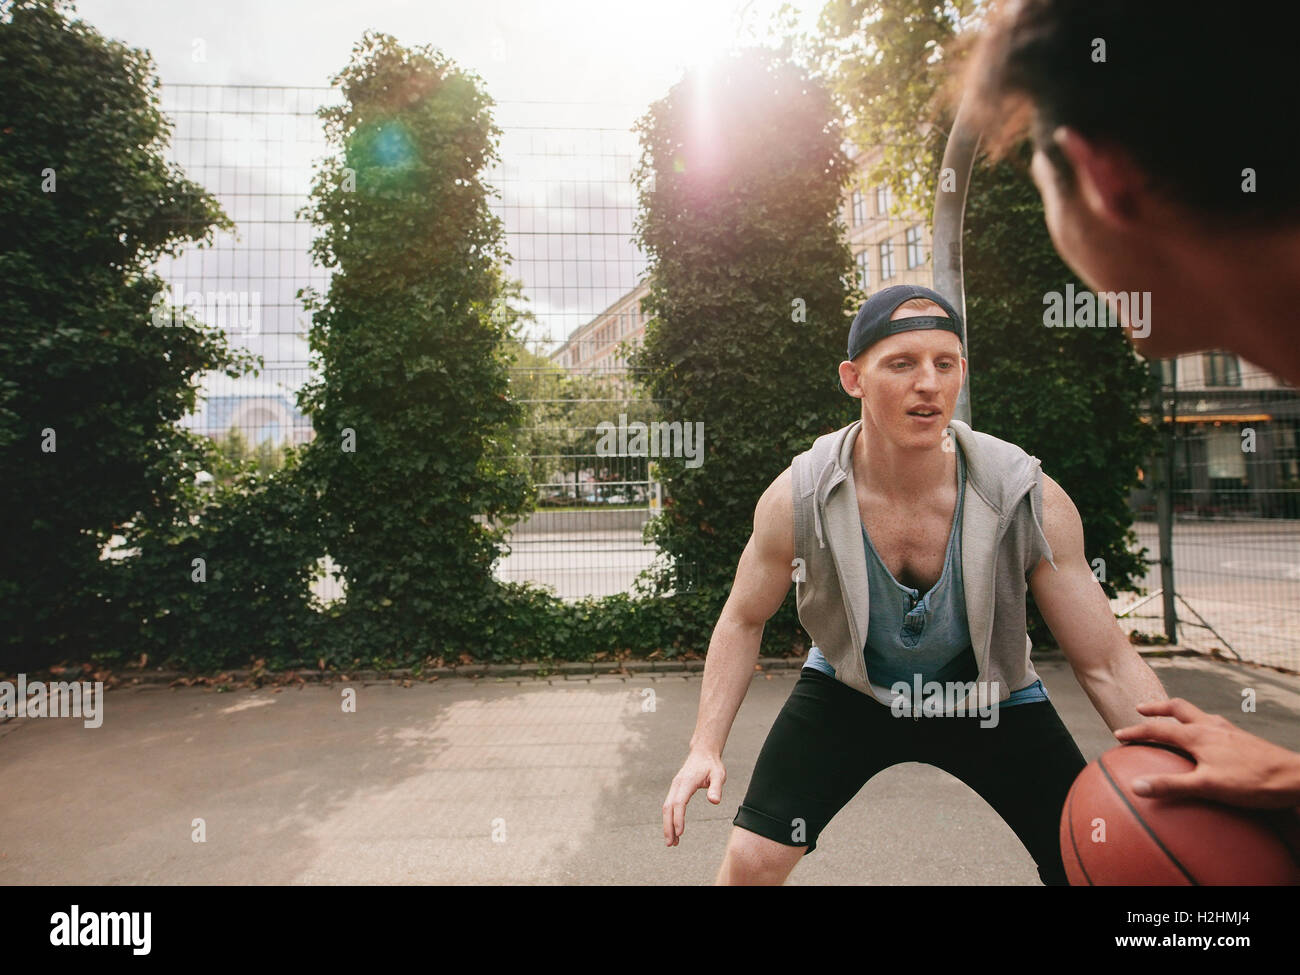 Two streetball players on the basketball court. Teenage friends playing streetball. Stock Photo